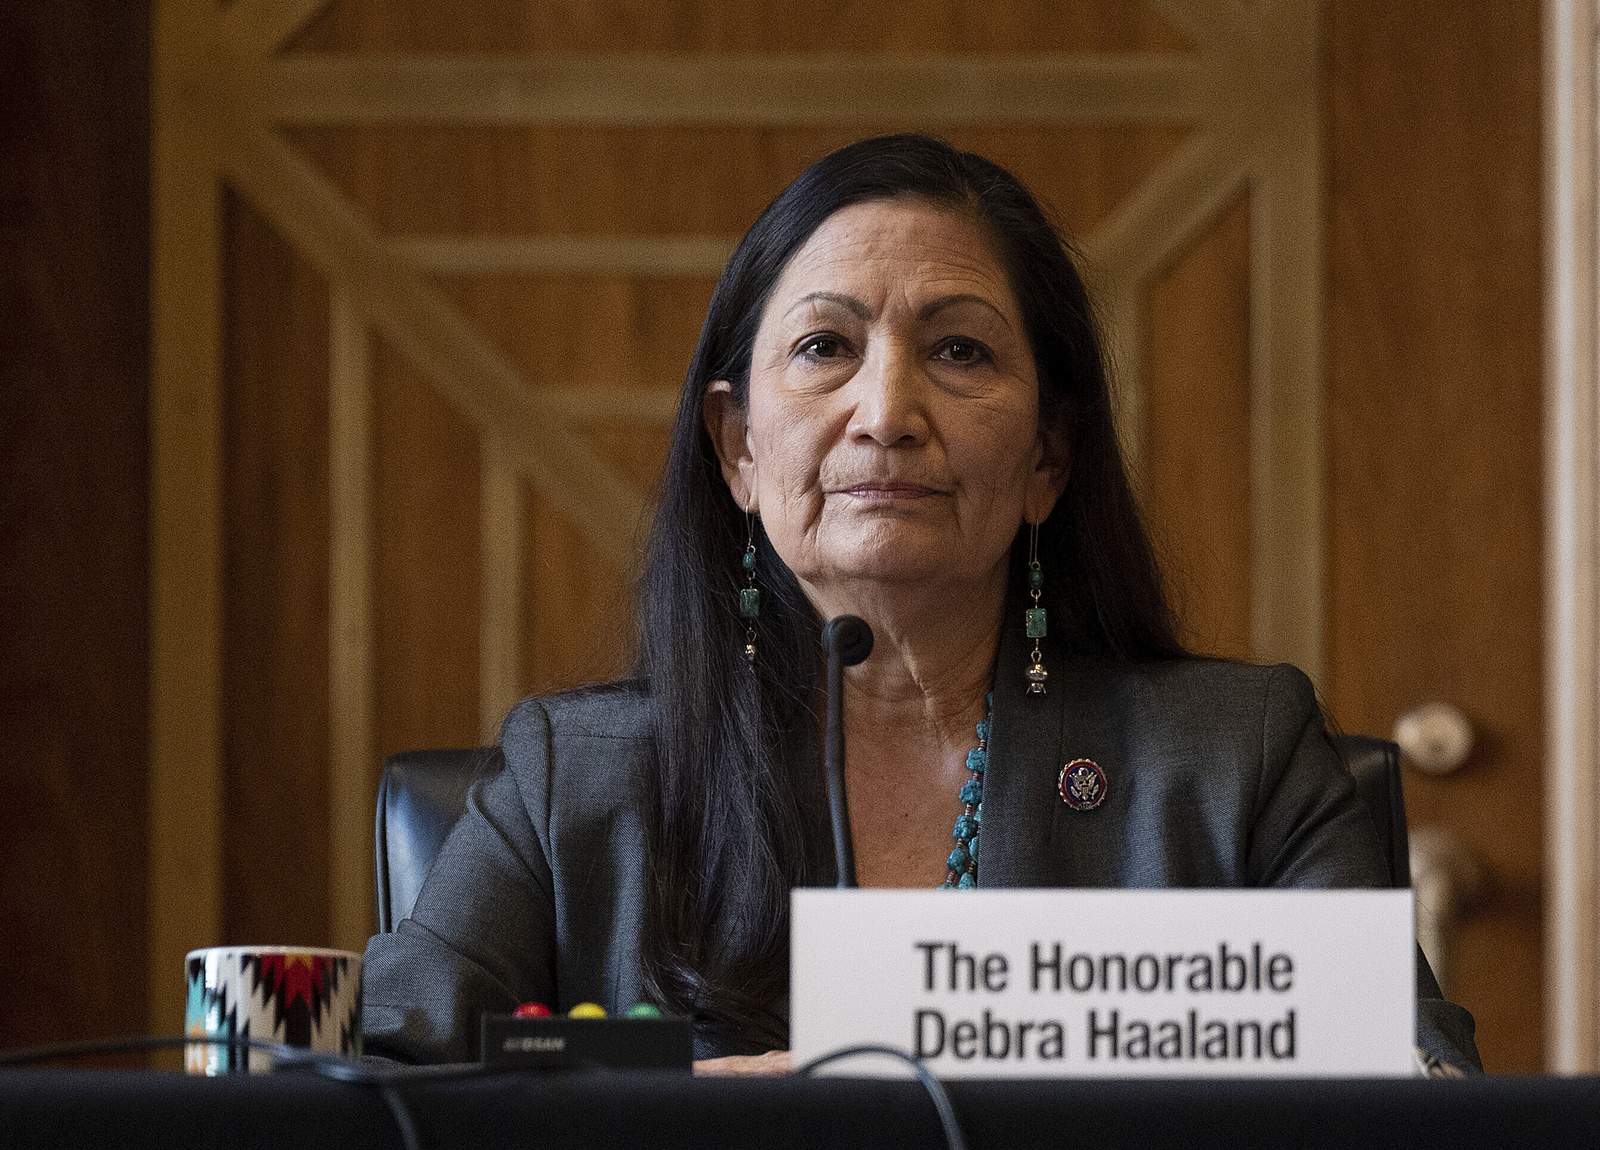 Native American nominee's grilling raises questions on bias